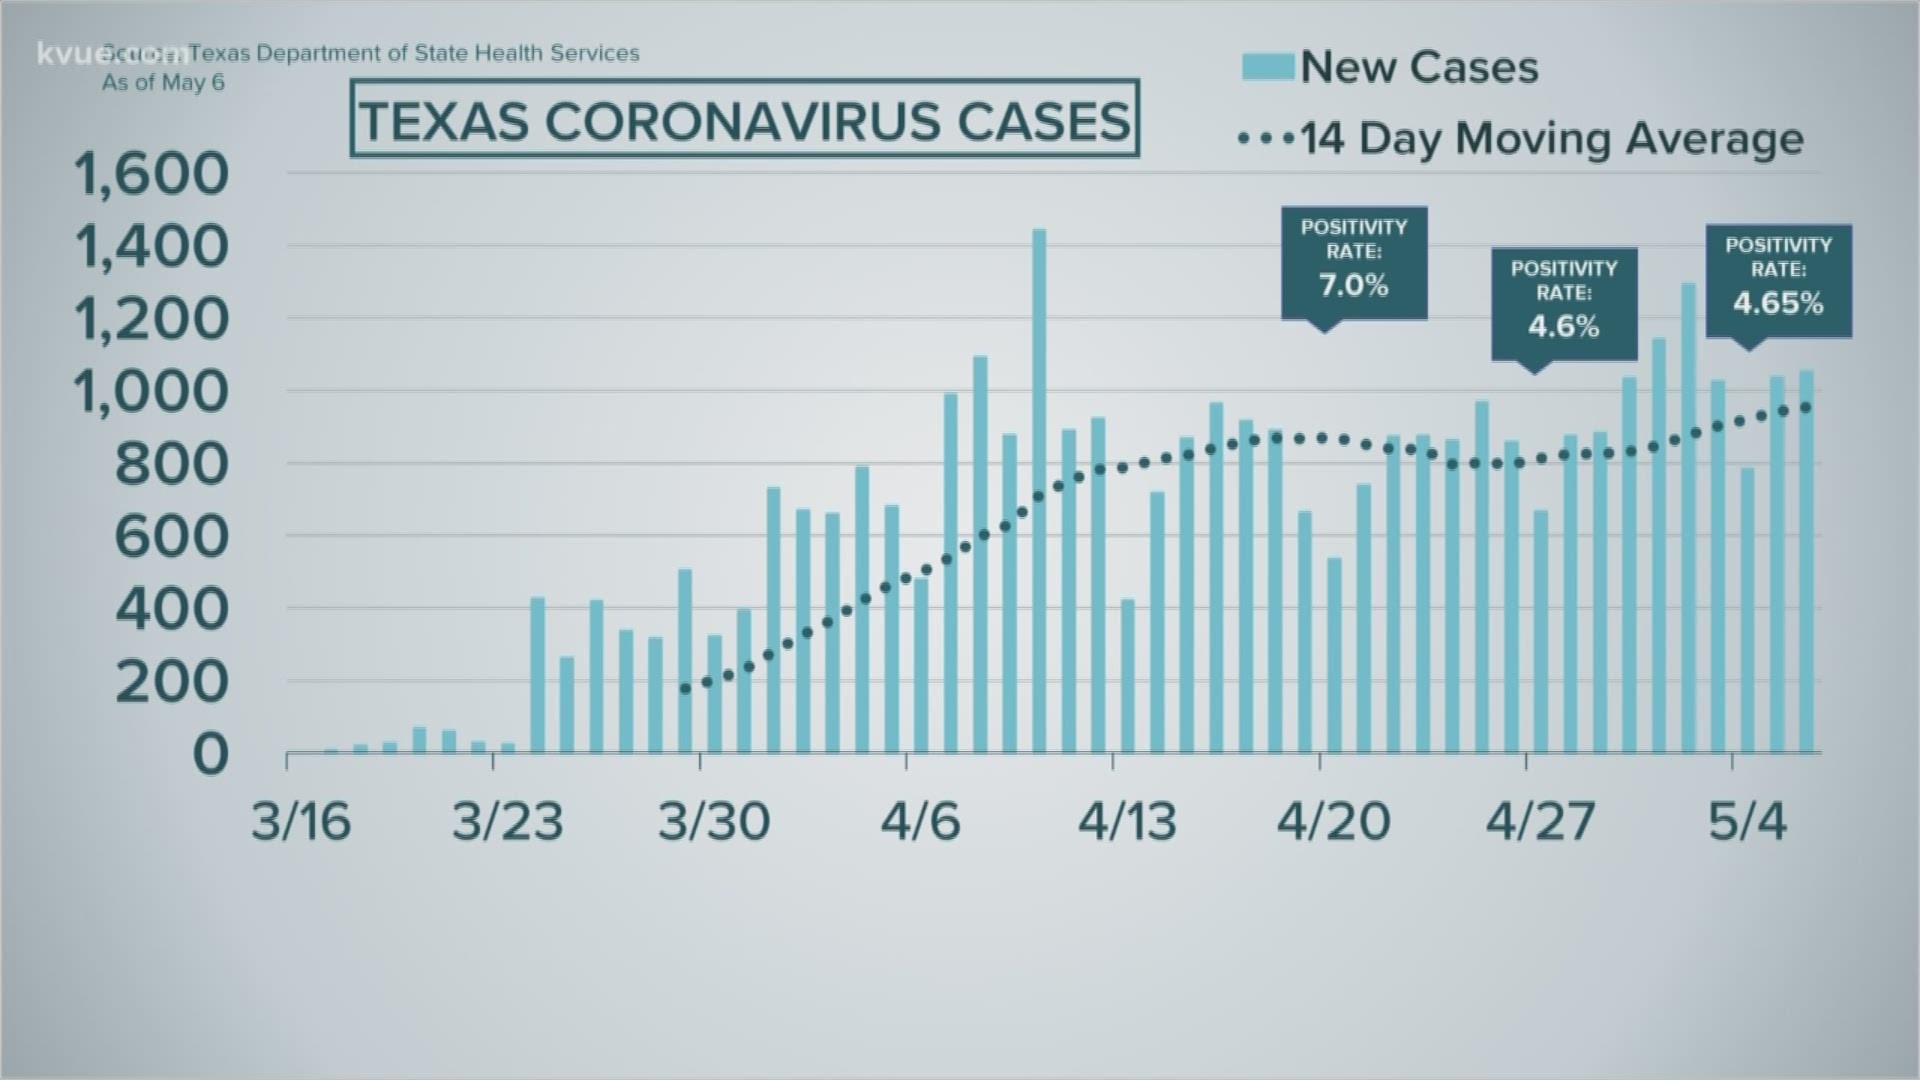 For the fifth day in a row Texas is confirming more than 1,000 new cases.